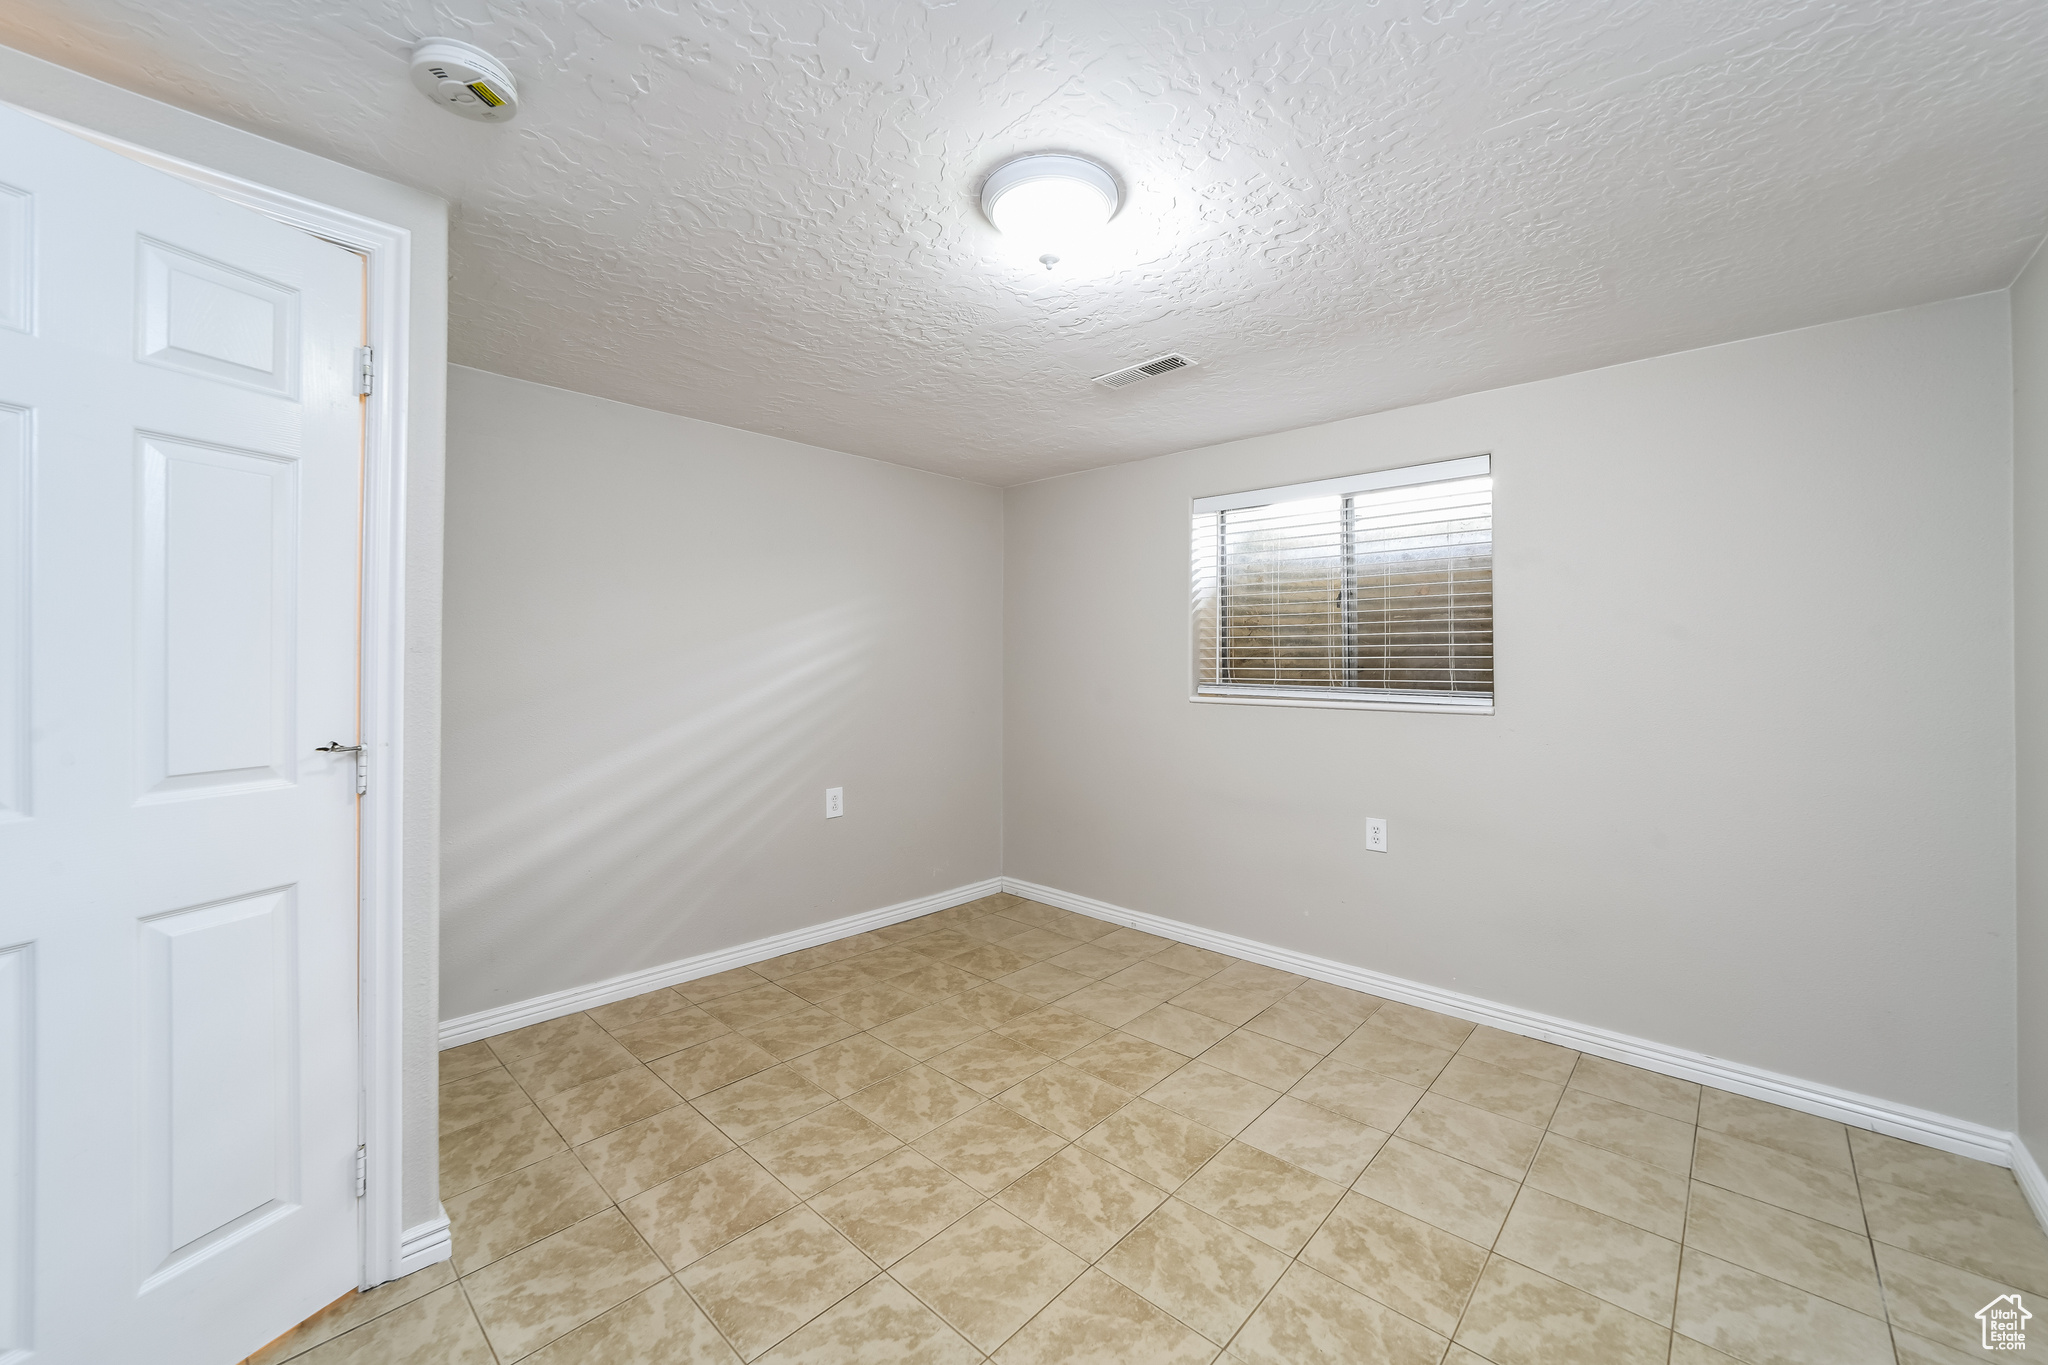 Unfurnished room with a textured ceiling and light tile floors